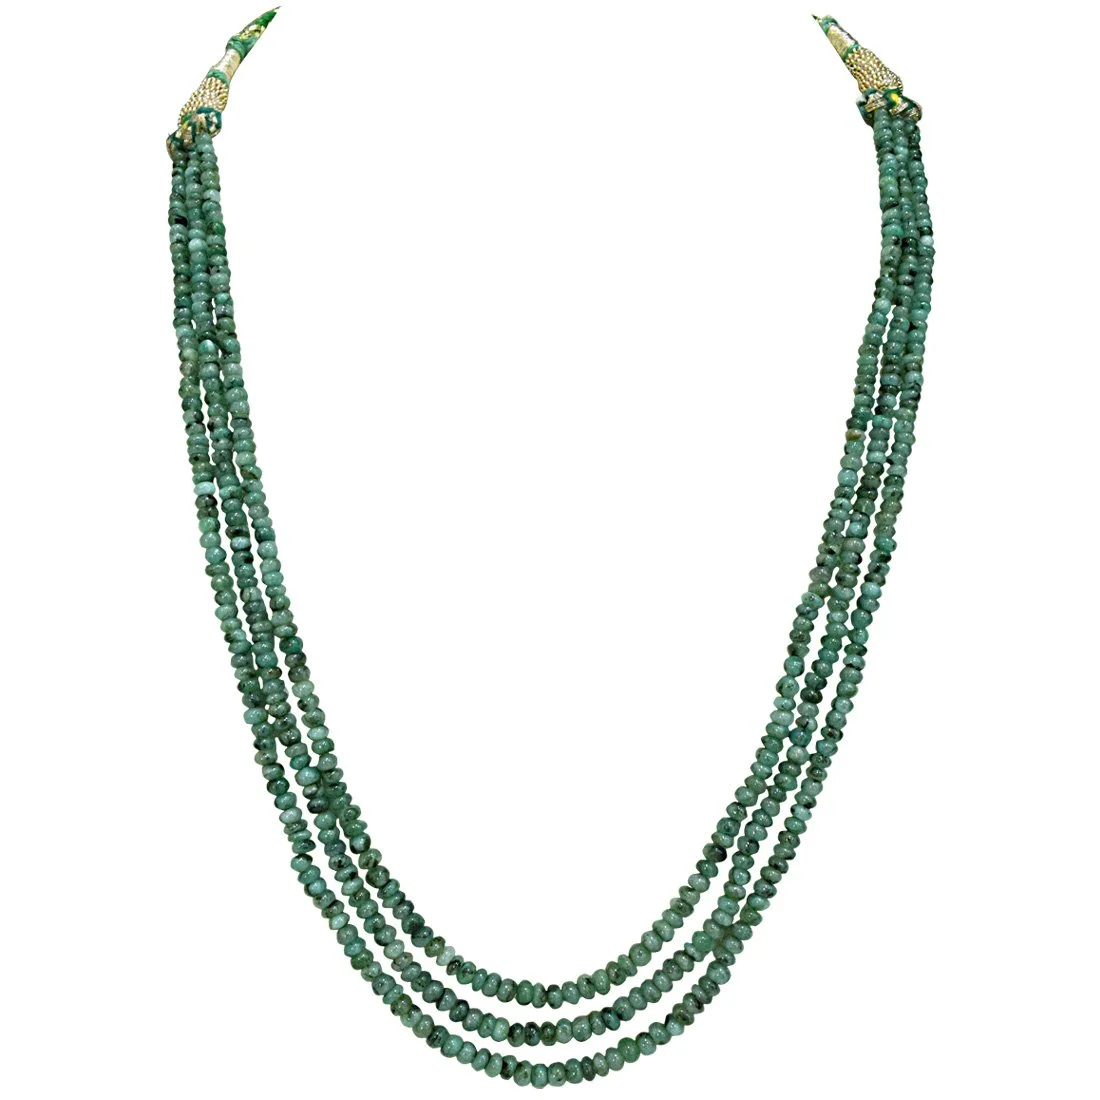 3 Line 151cts Real Natural Green Emerald Beads Necklace